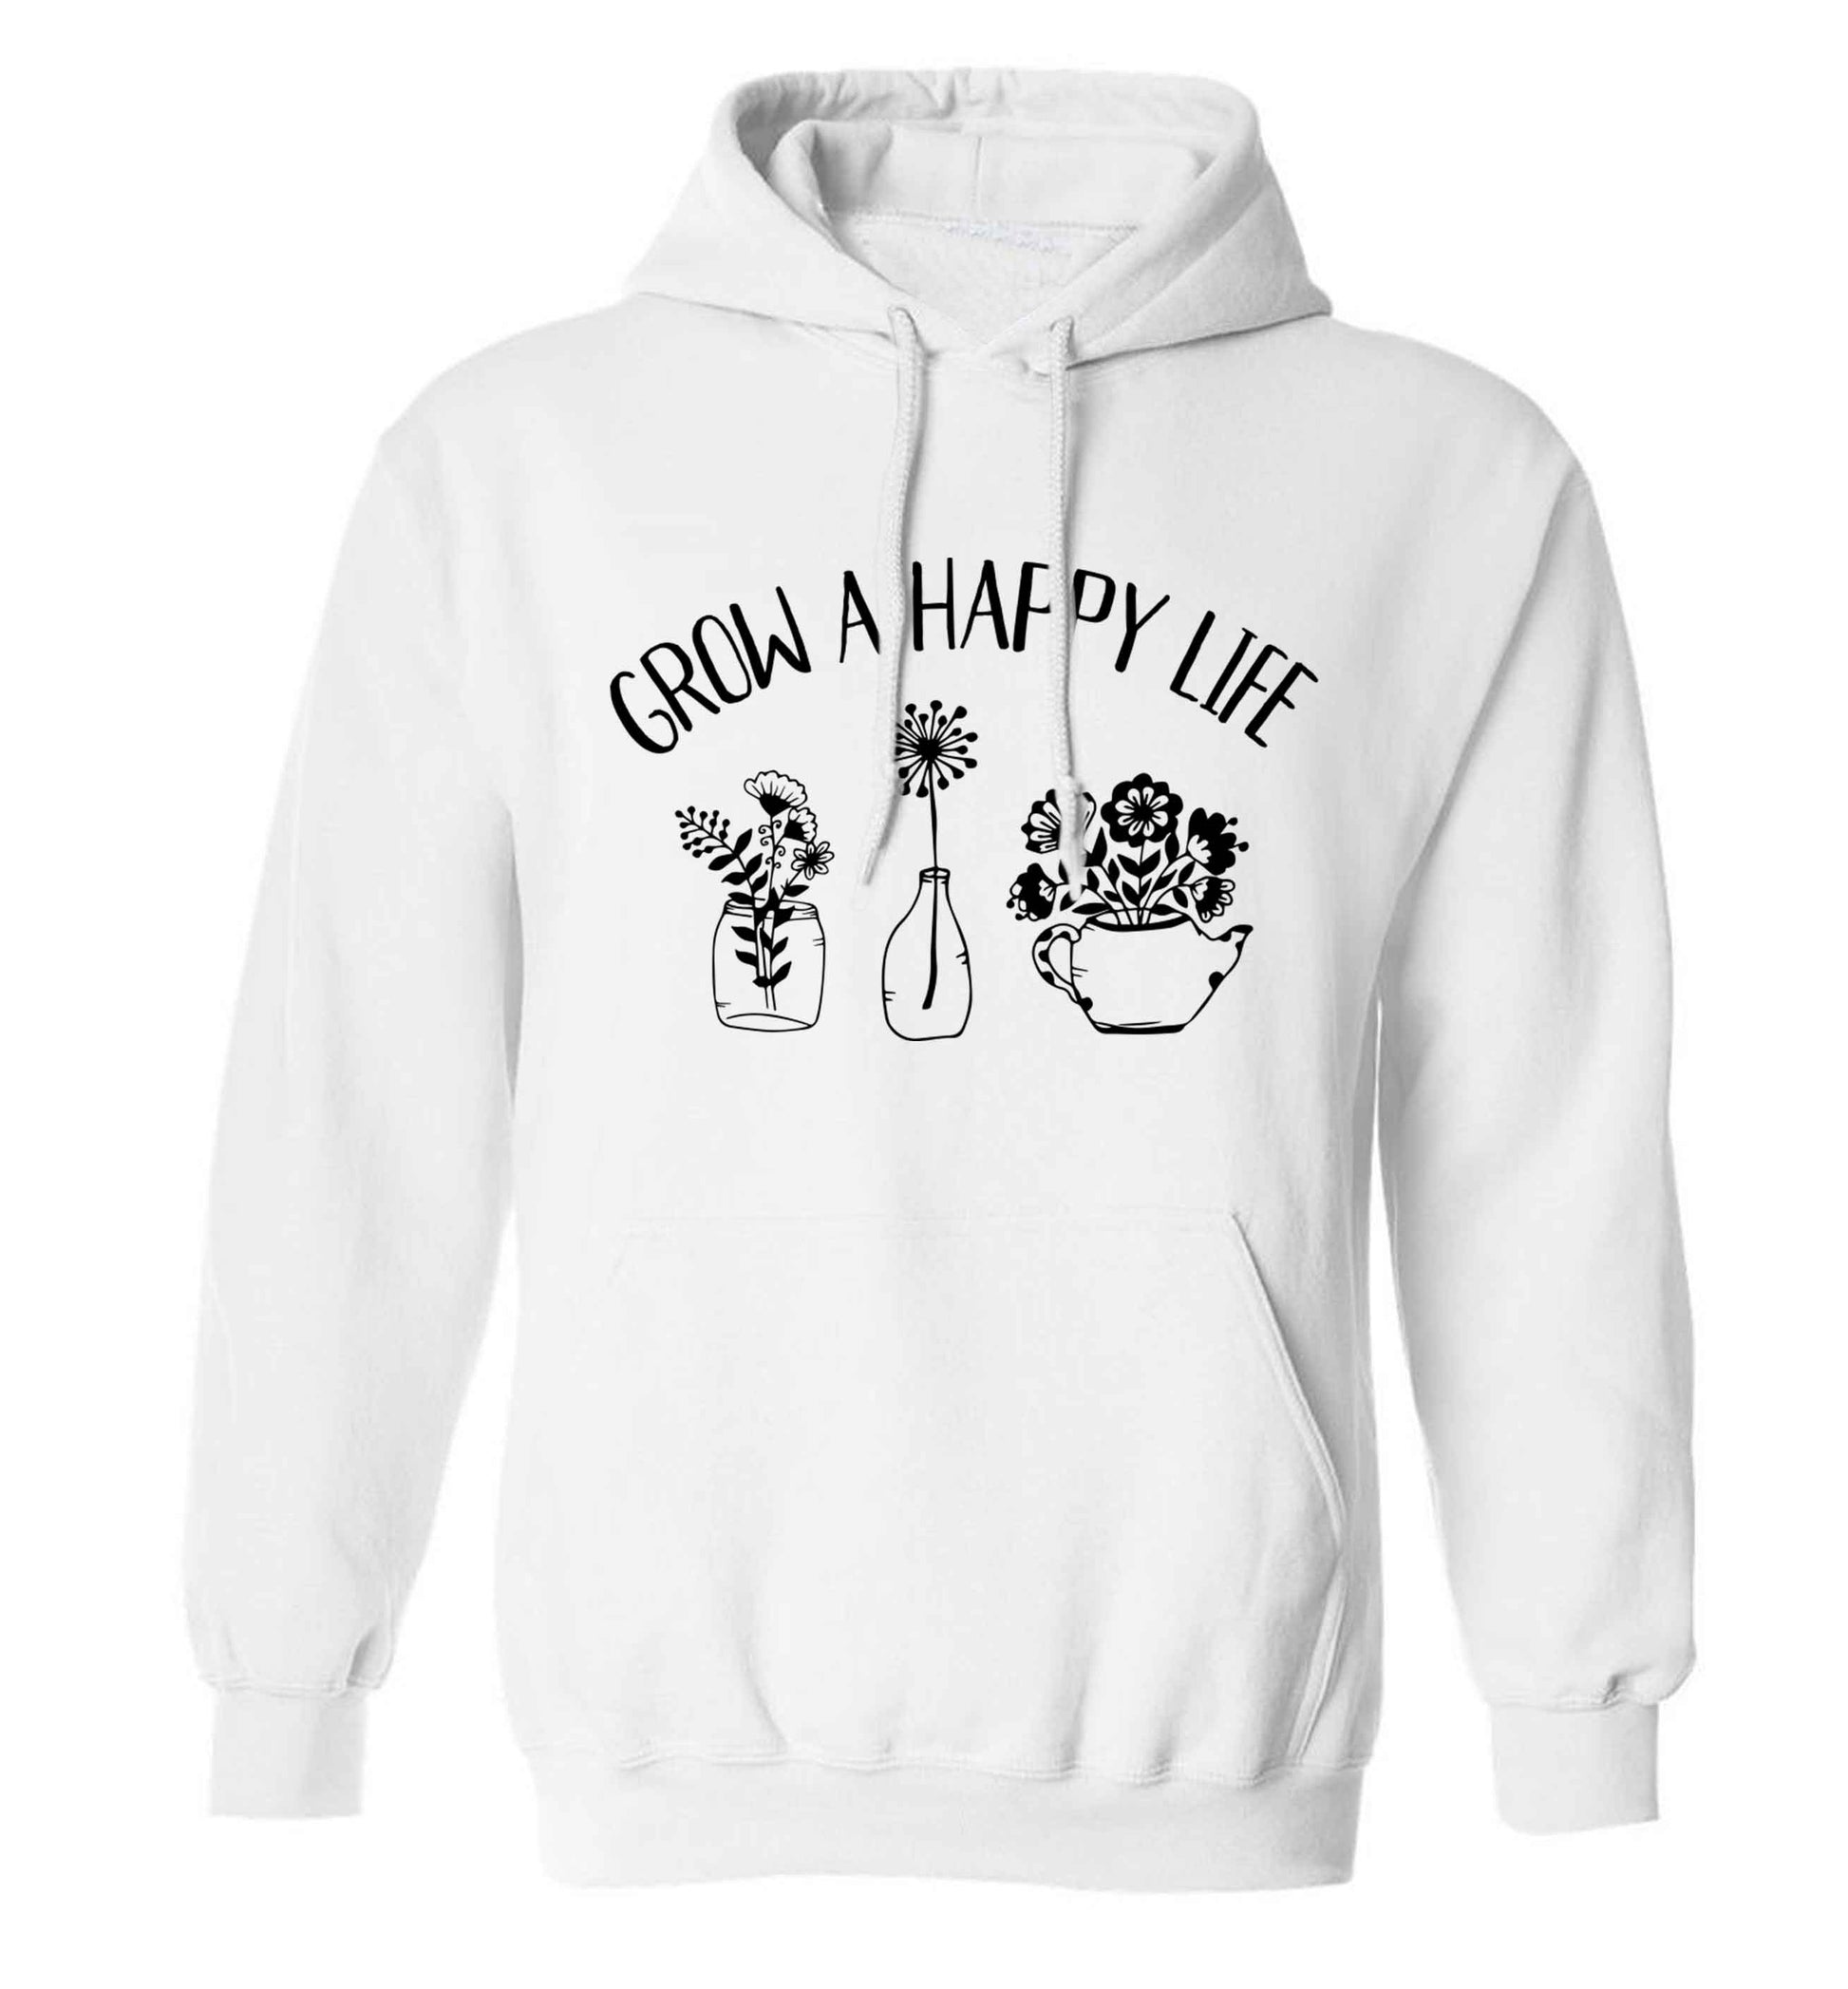 Grow a happy life adults unisex white hoodie 2XL